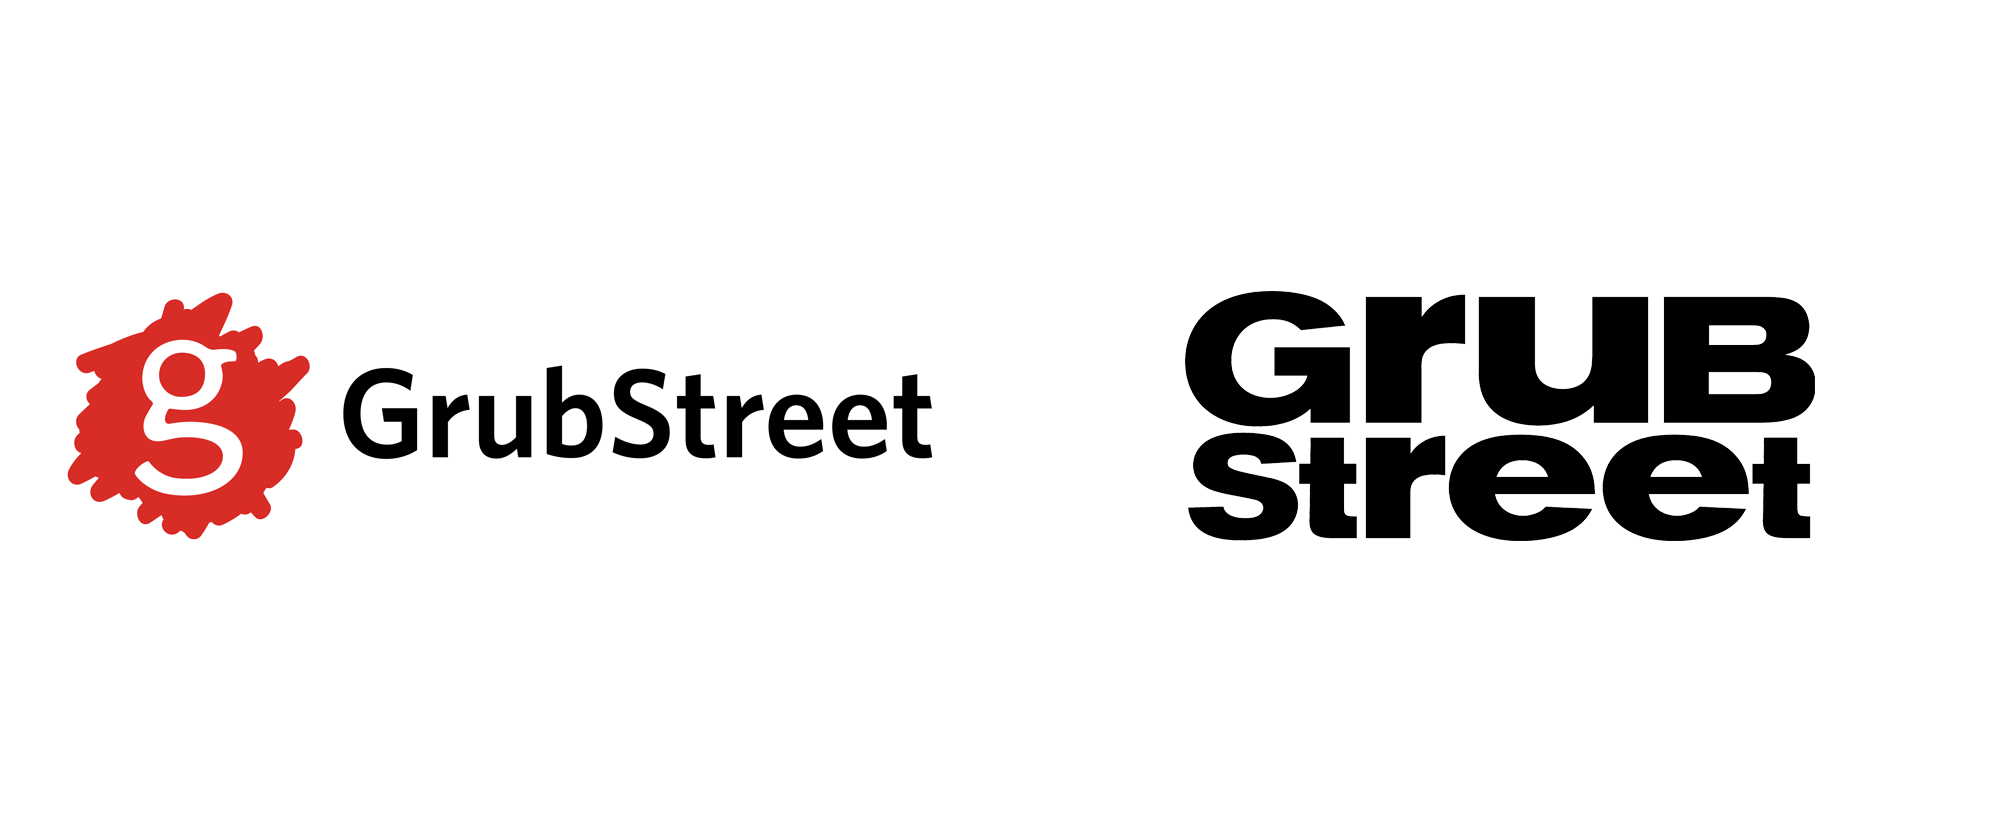 New Logo and Identity for GrubStreet by Catapult